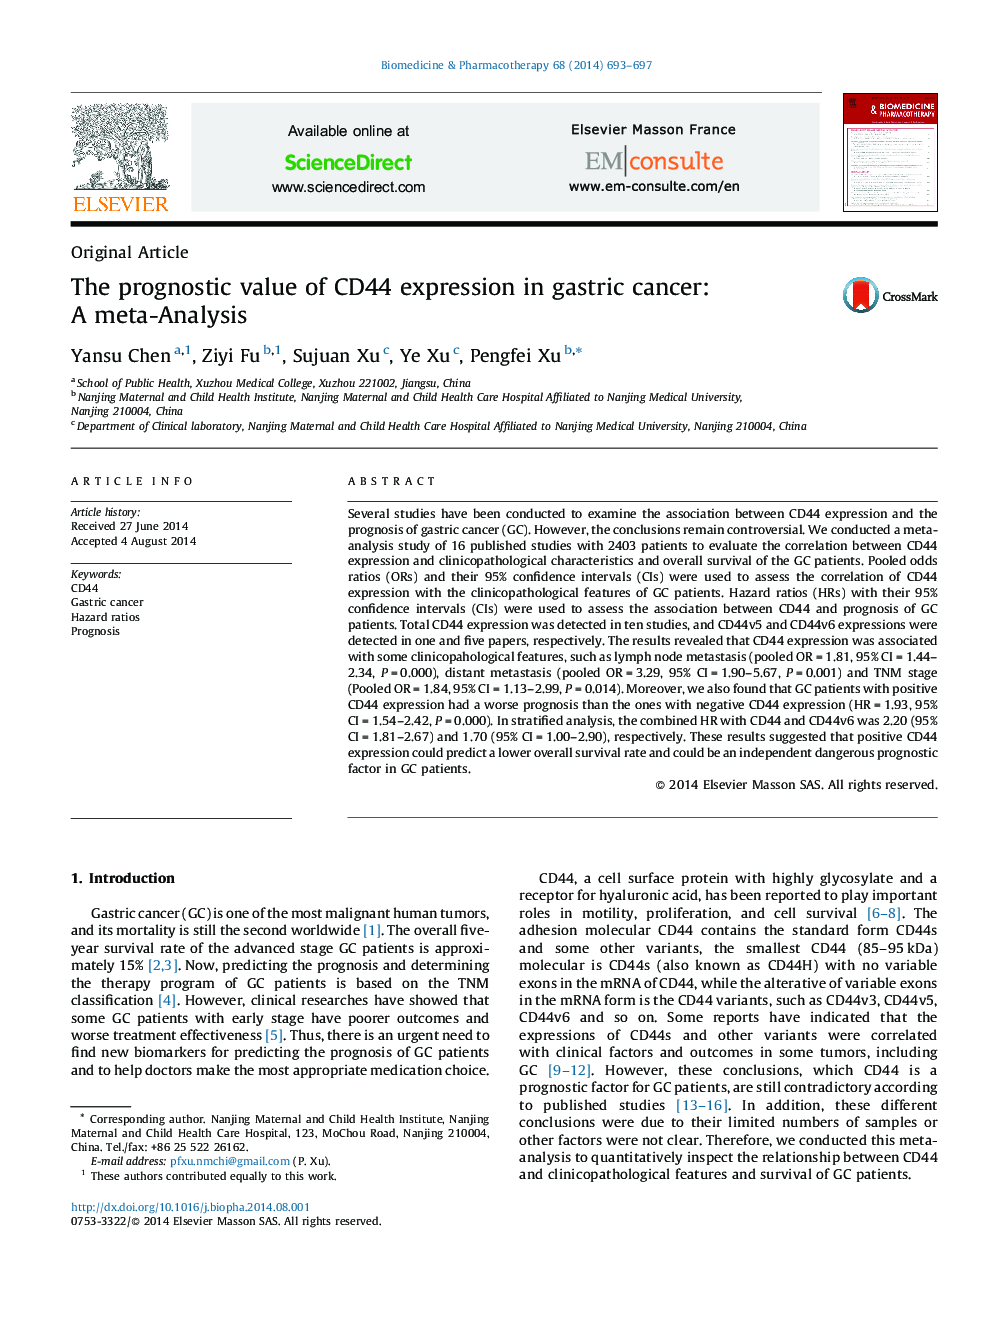 The prognostic value of CD44 expression in gastric cancer: A meta-Analysis